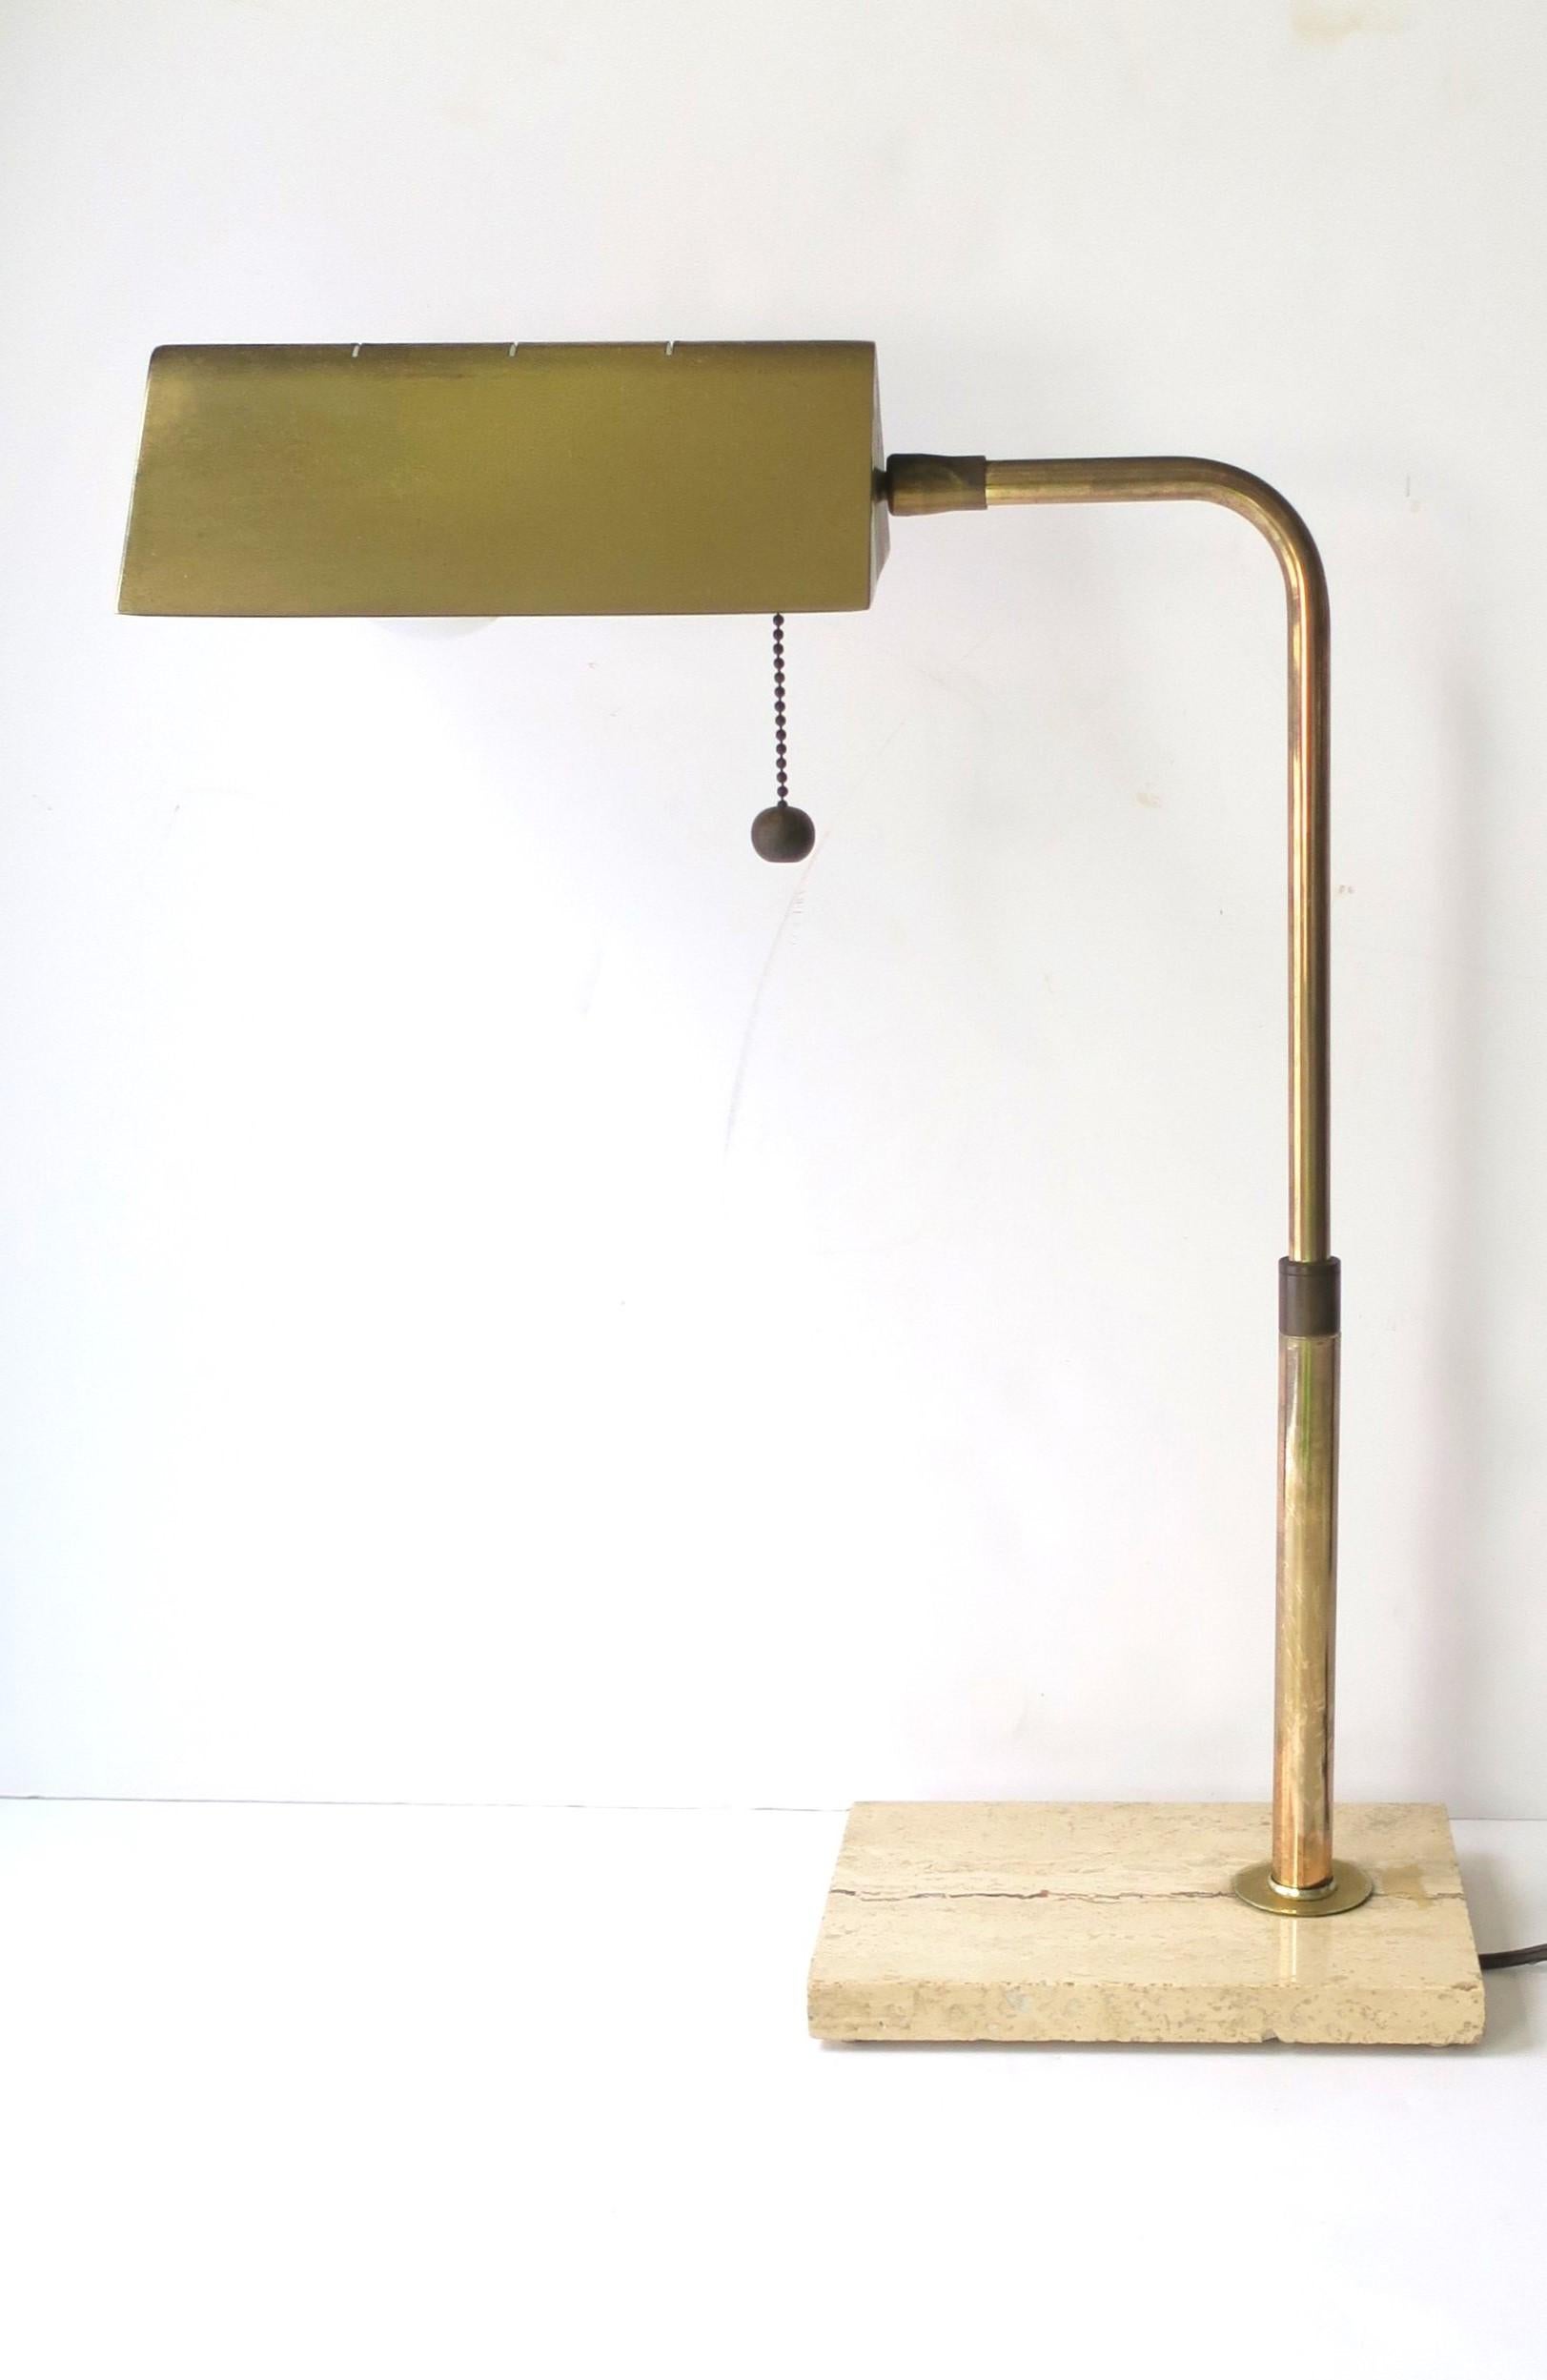 An Italian brass and travertine marble table or desk lamp, circa 1960s, 1970s, mid to late-20th century, Italy. Lamp has flexible shade, easy on/off pull chain with ball, and a rectangular neutral travertine marble base. Lamp would work as a table